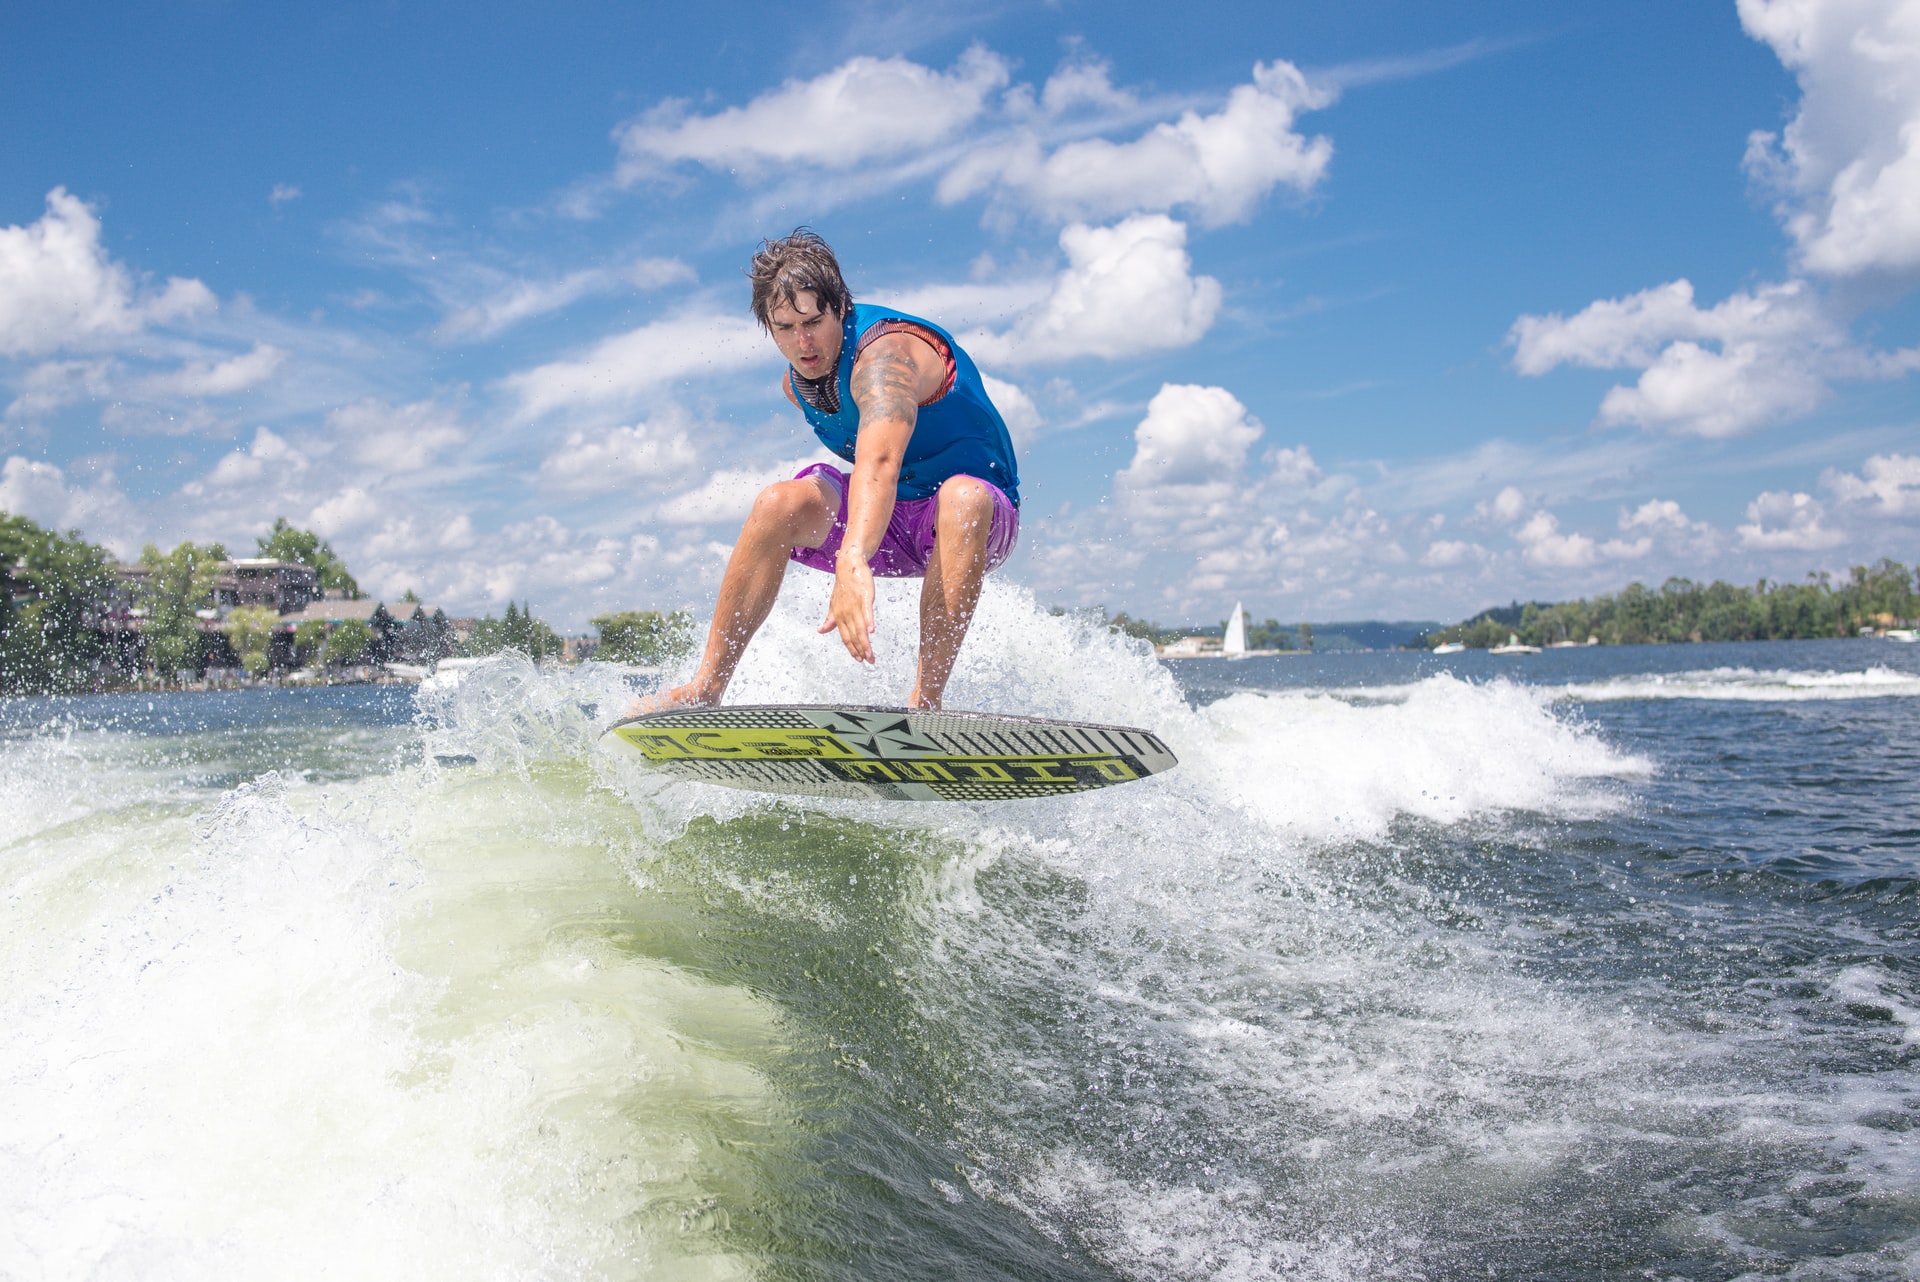 Can You Wakeboard Without a Tower?